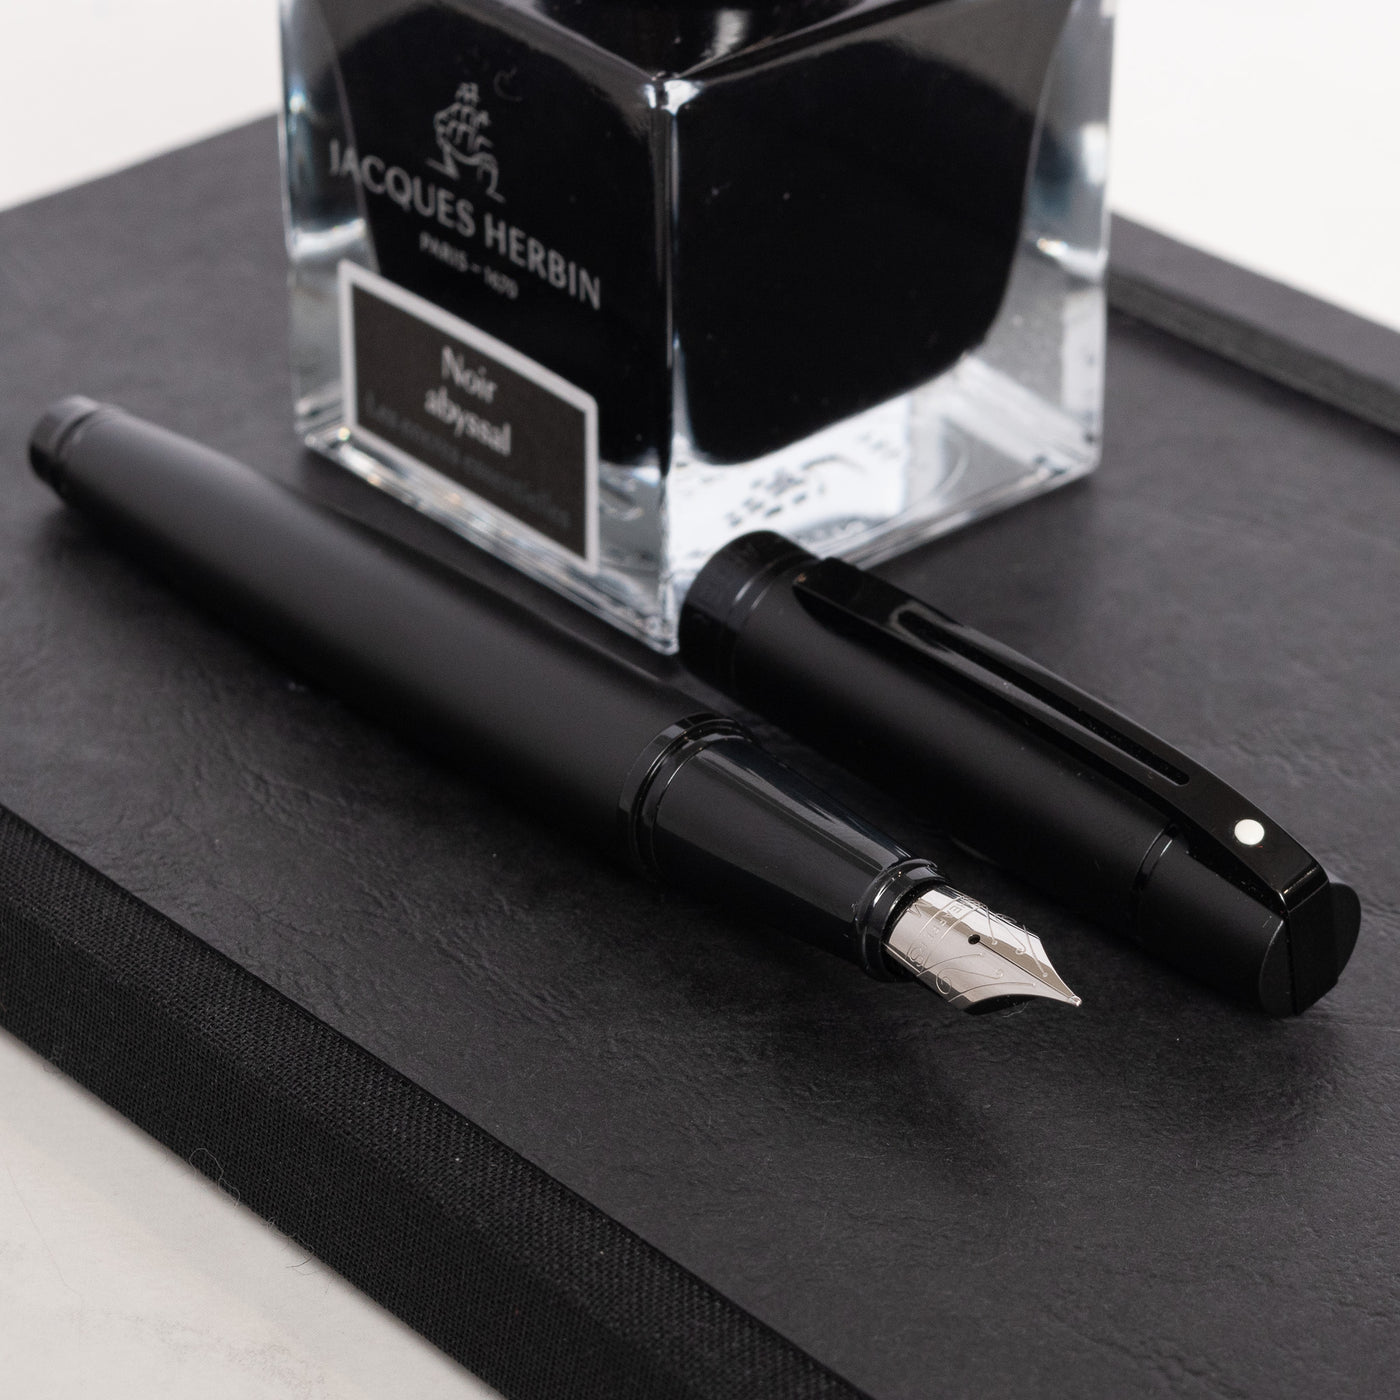 Sheaffer 300 Fountain Pen - Black with Black Trim blacked out